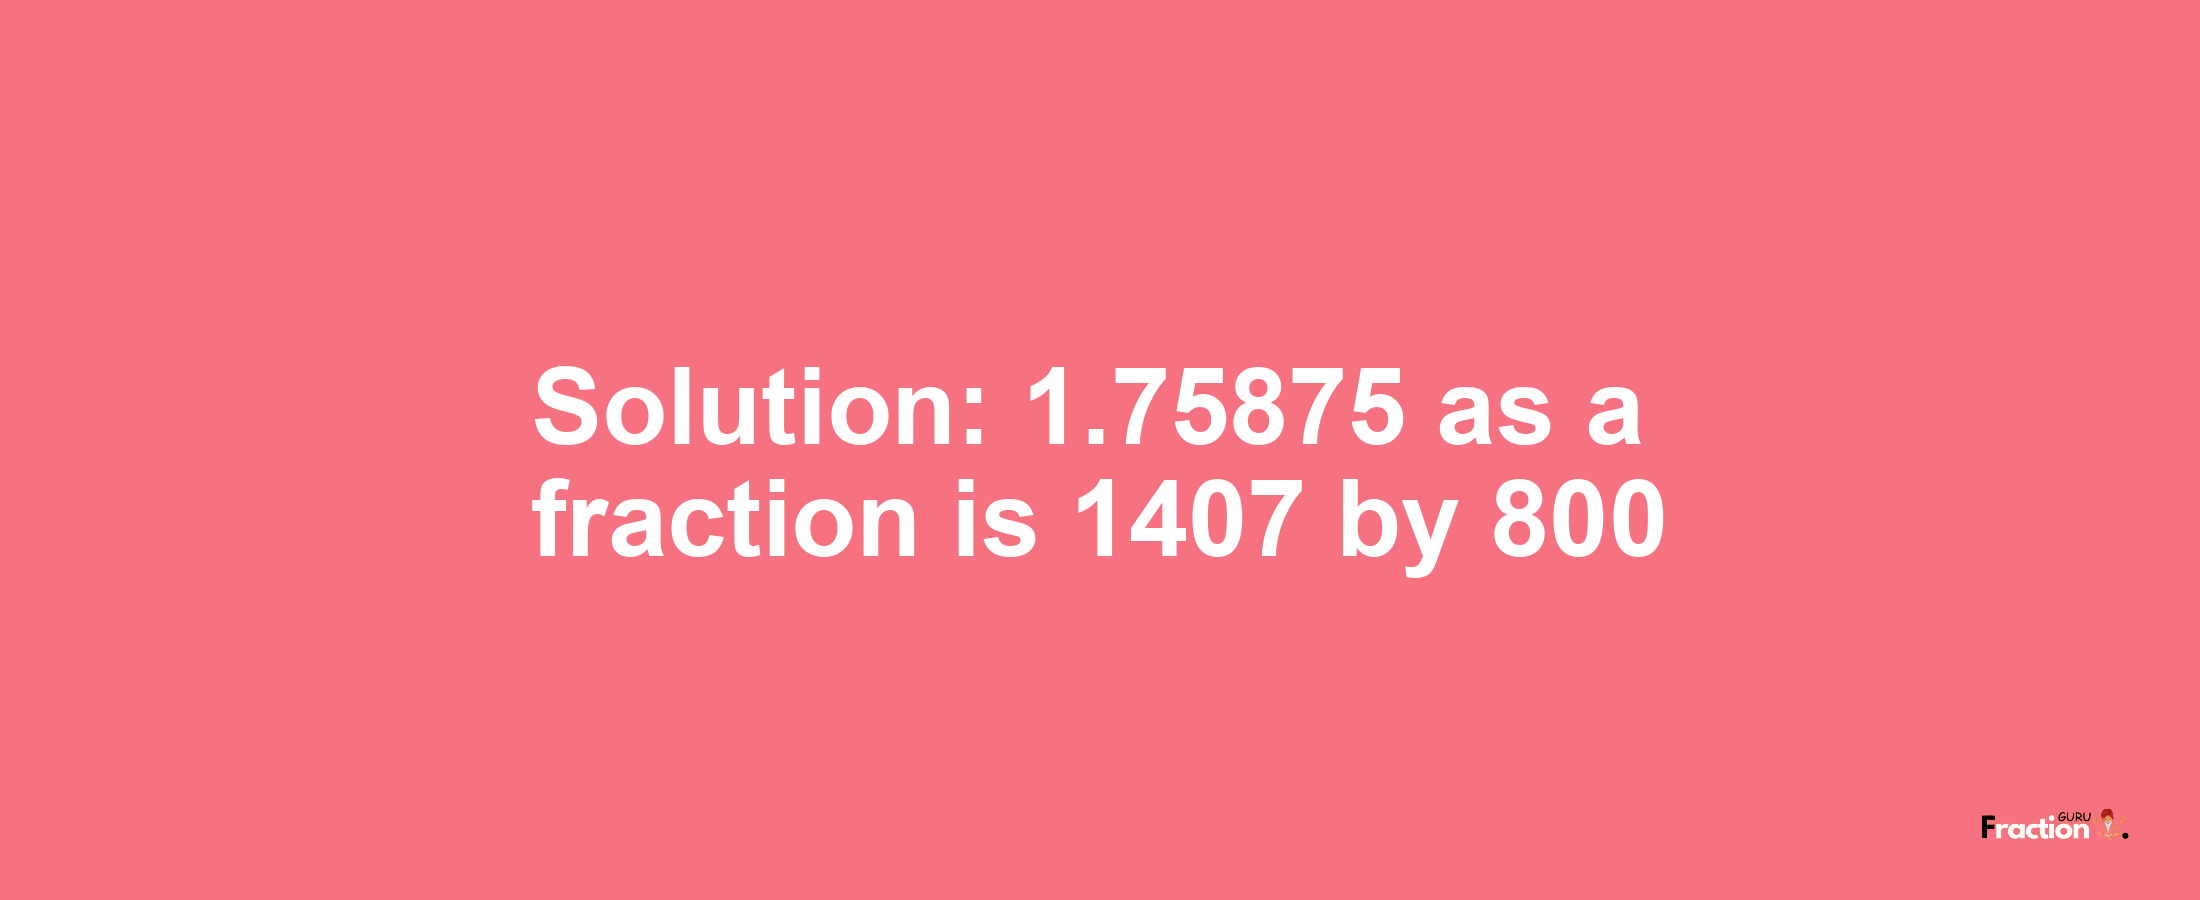 Solution:1.75875 as a fraction is 1407/800